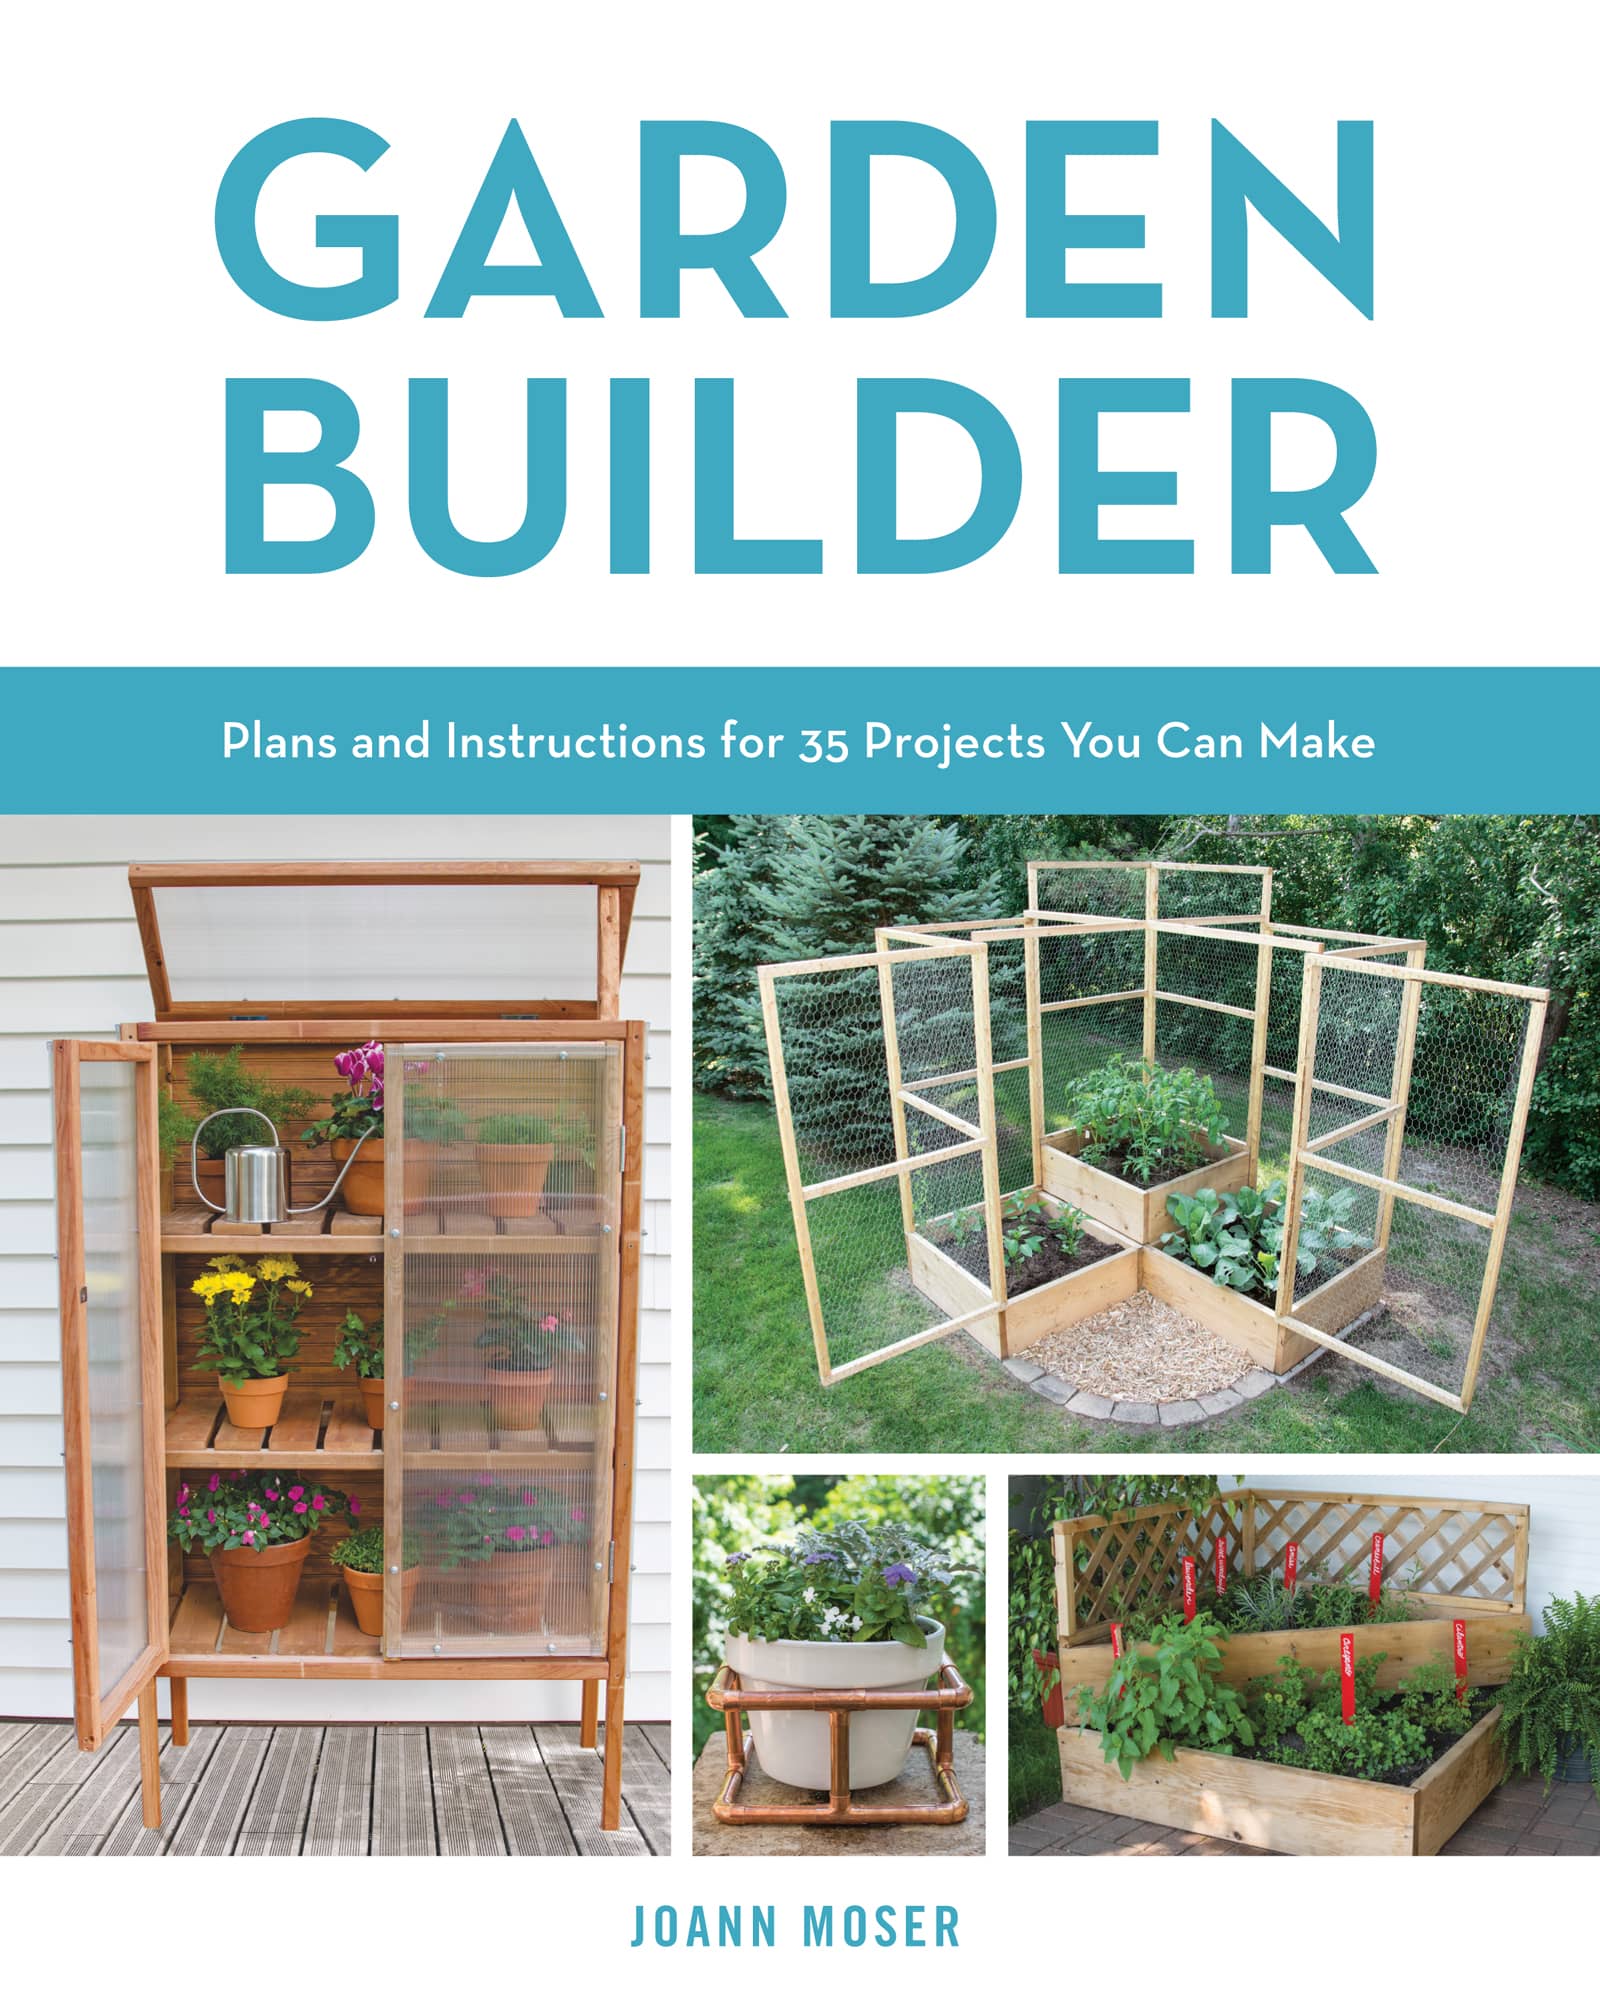 GARDEN BUILDER Plans and Instructions for 35 Projects You Can Make JOANN MOSER - photo 1